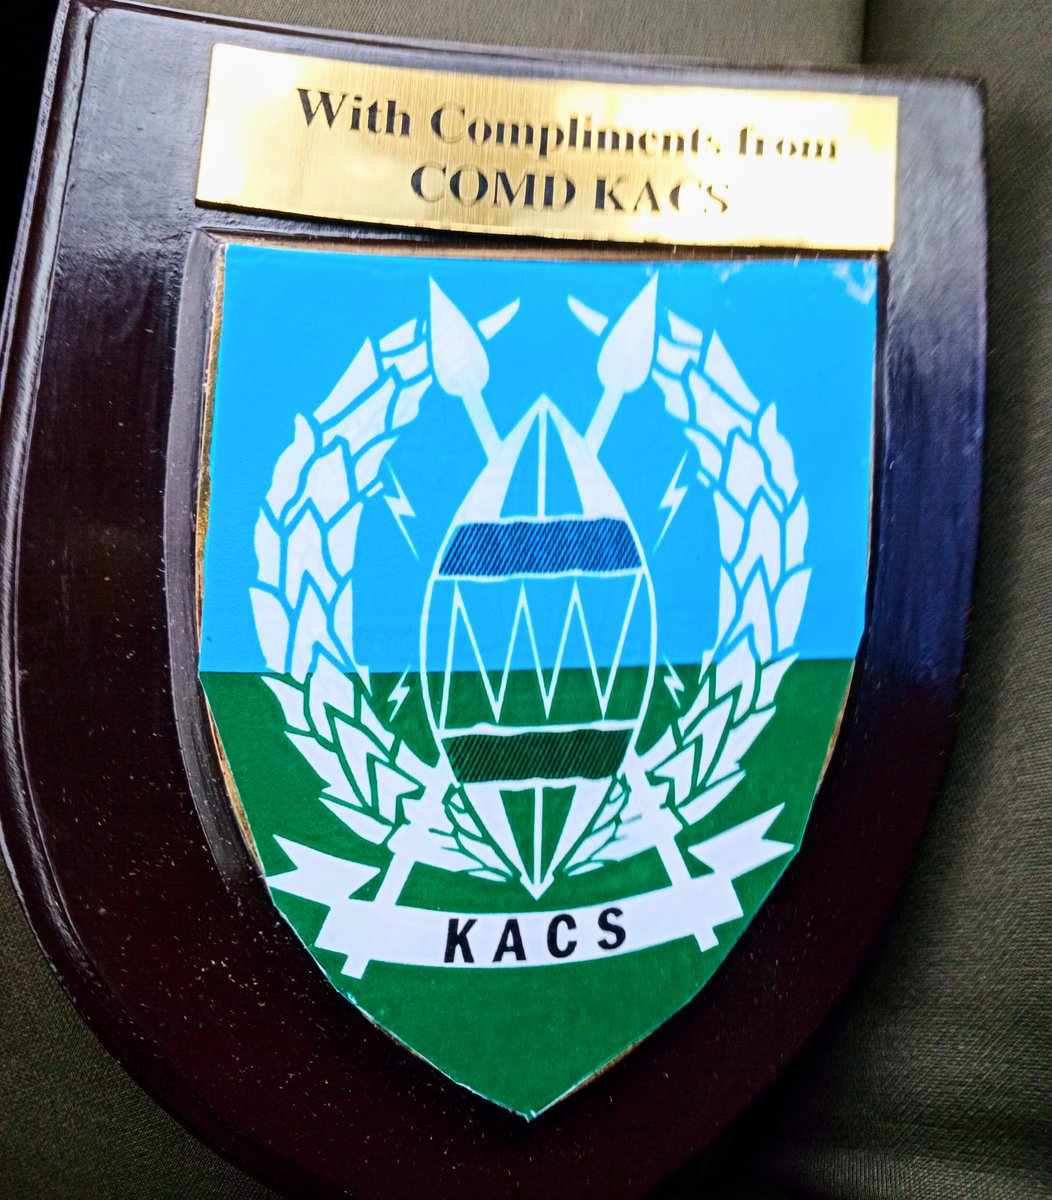 Today the Green up Kenya campaign tree growing and climate change sensitization exercise was held at Kinale Forest Station, Kiambu County. We received a mementos from the Comd KACS in recognition of our work with @kdfinfo Environmental Soldier Program